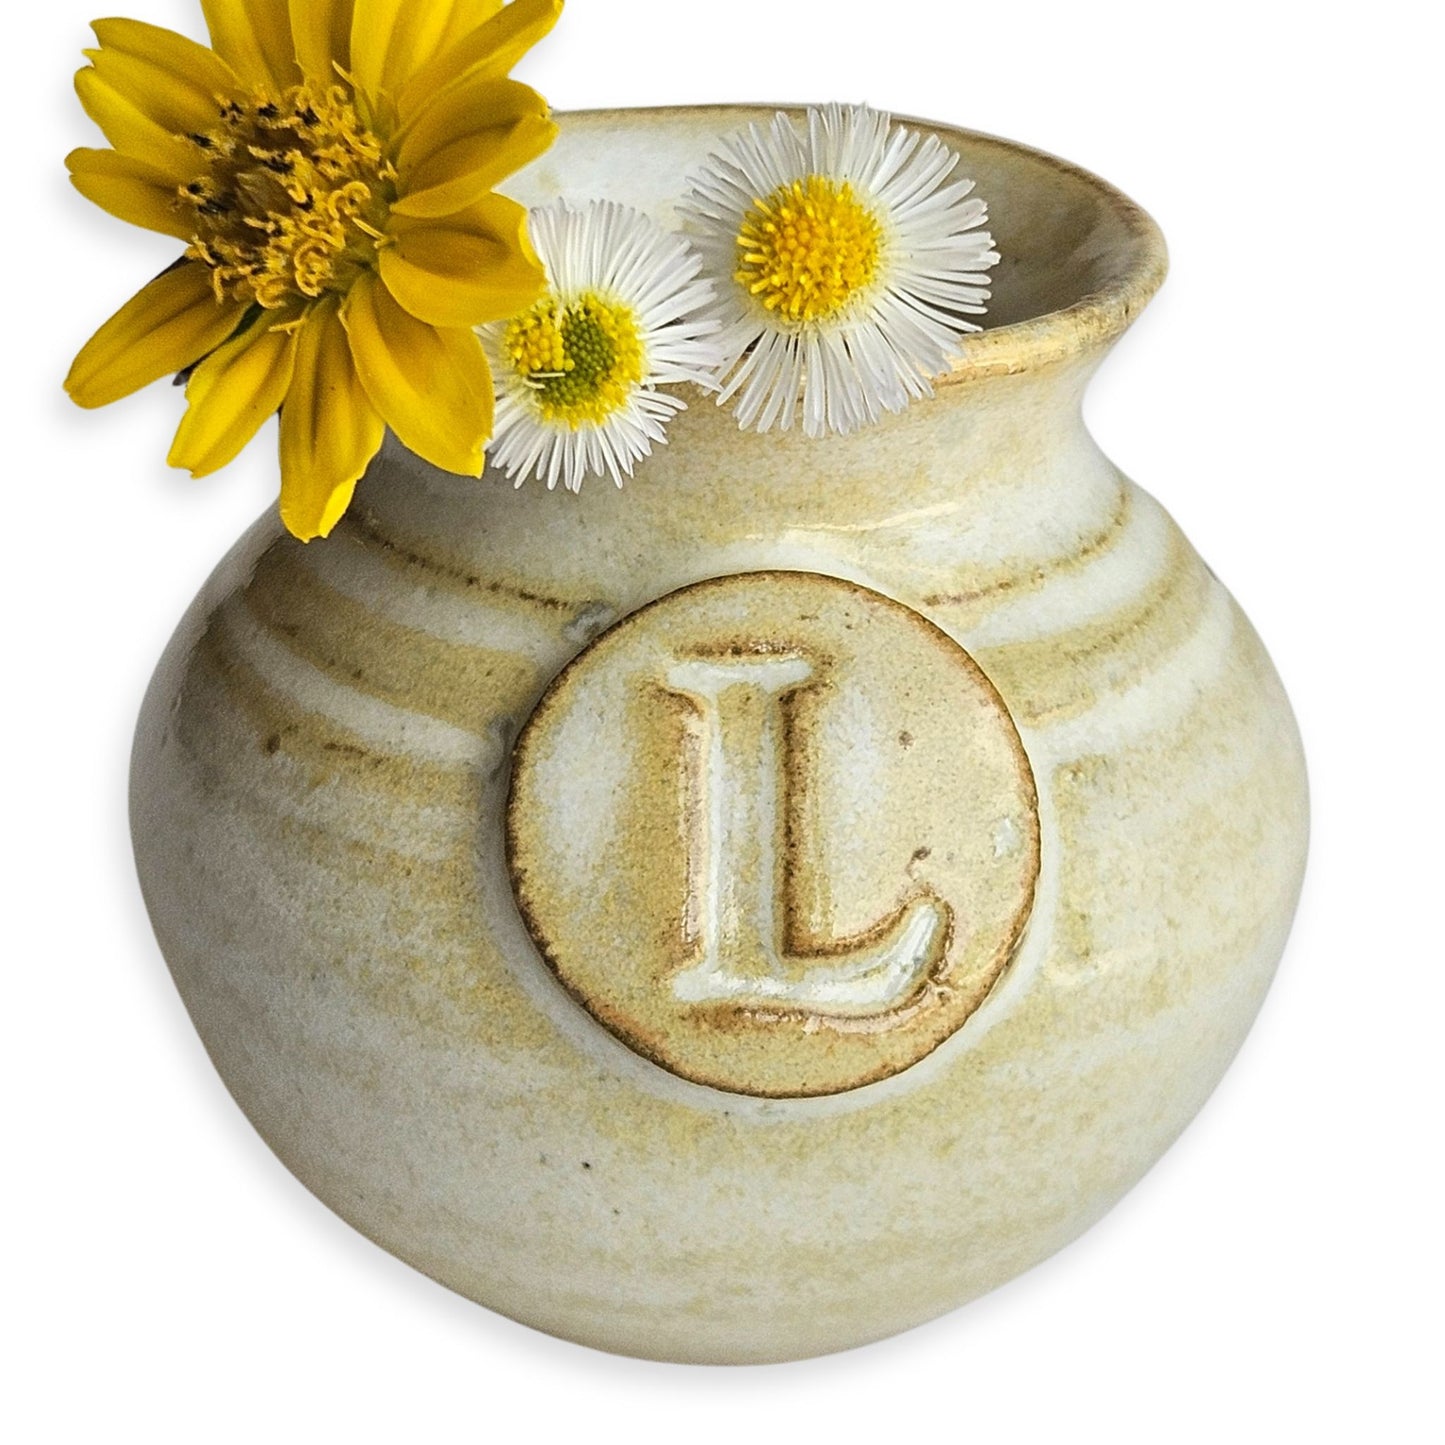 Personalized Cream Miniature Mommy Pot - Handcrafted Vase for New Parents, Includes Poem Card